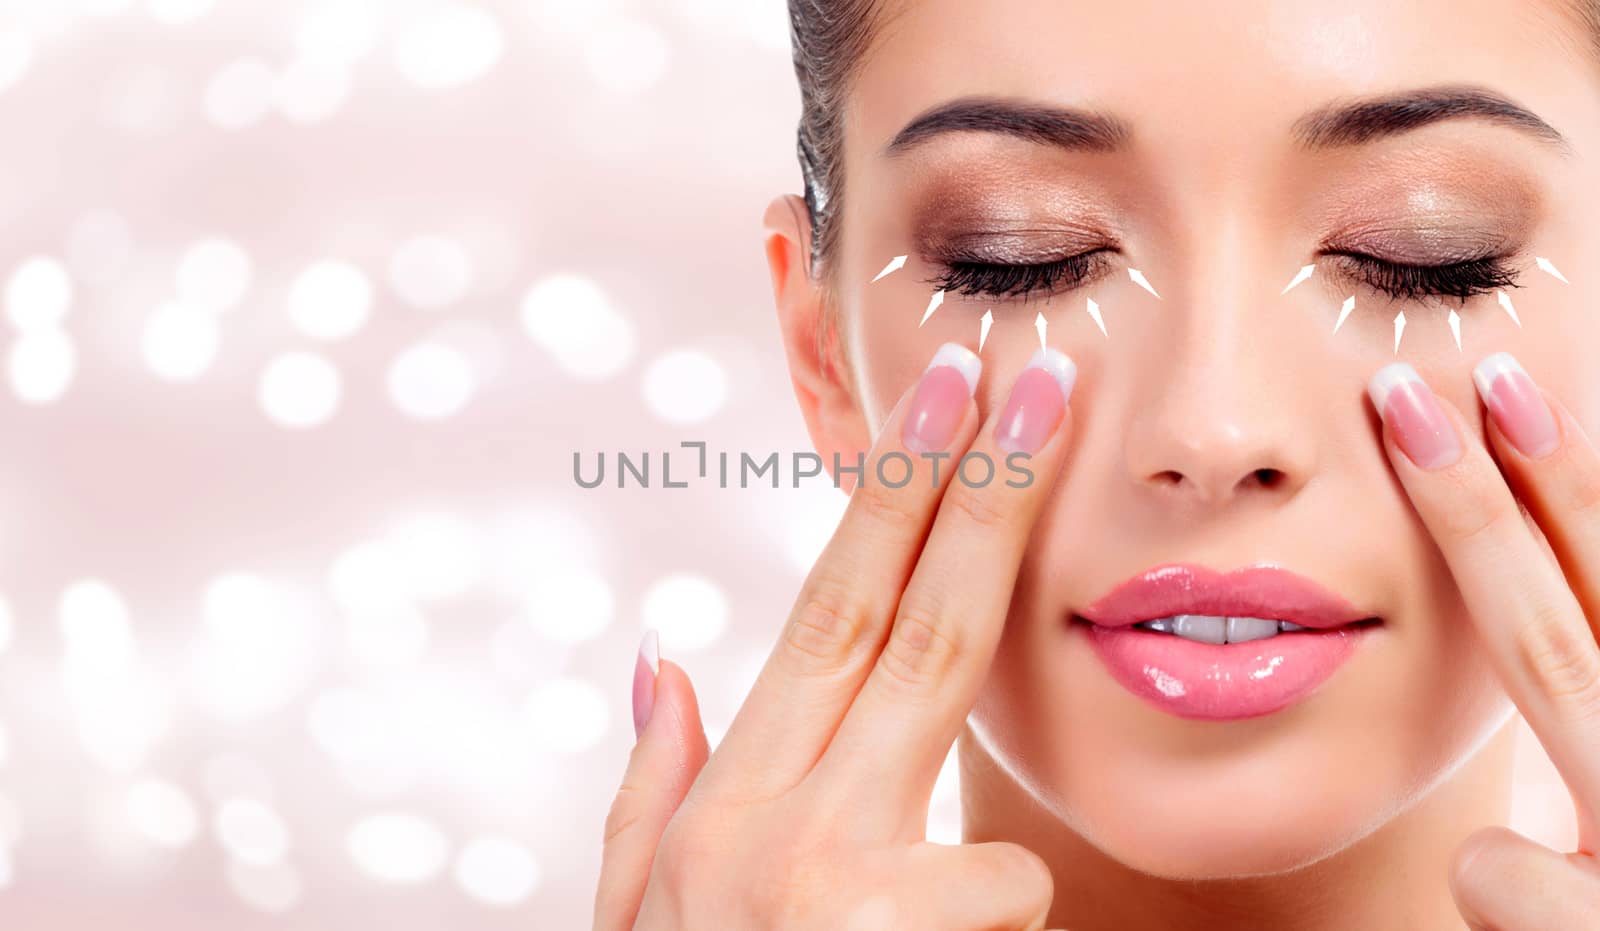 Pretty woman massaging her face, skin treatment antiaging concept. Abstract background with blurred lights